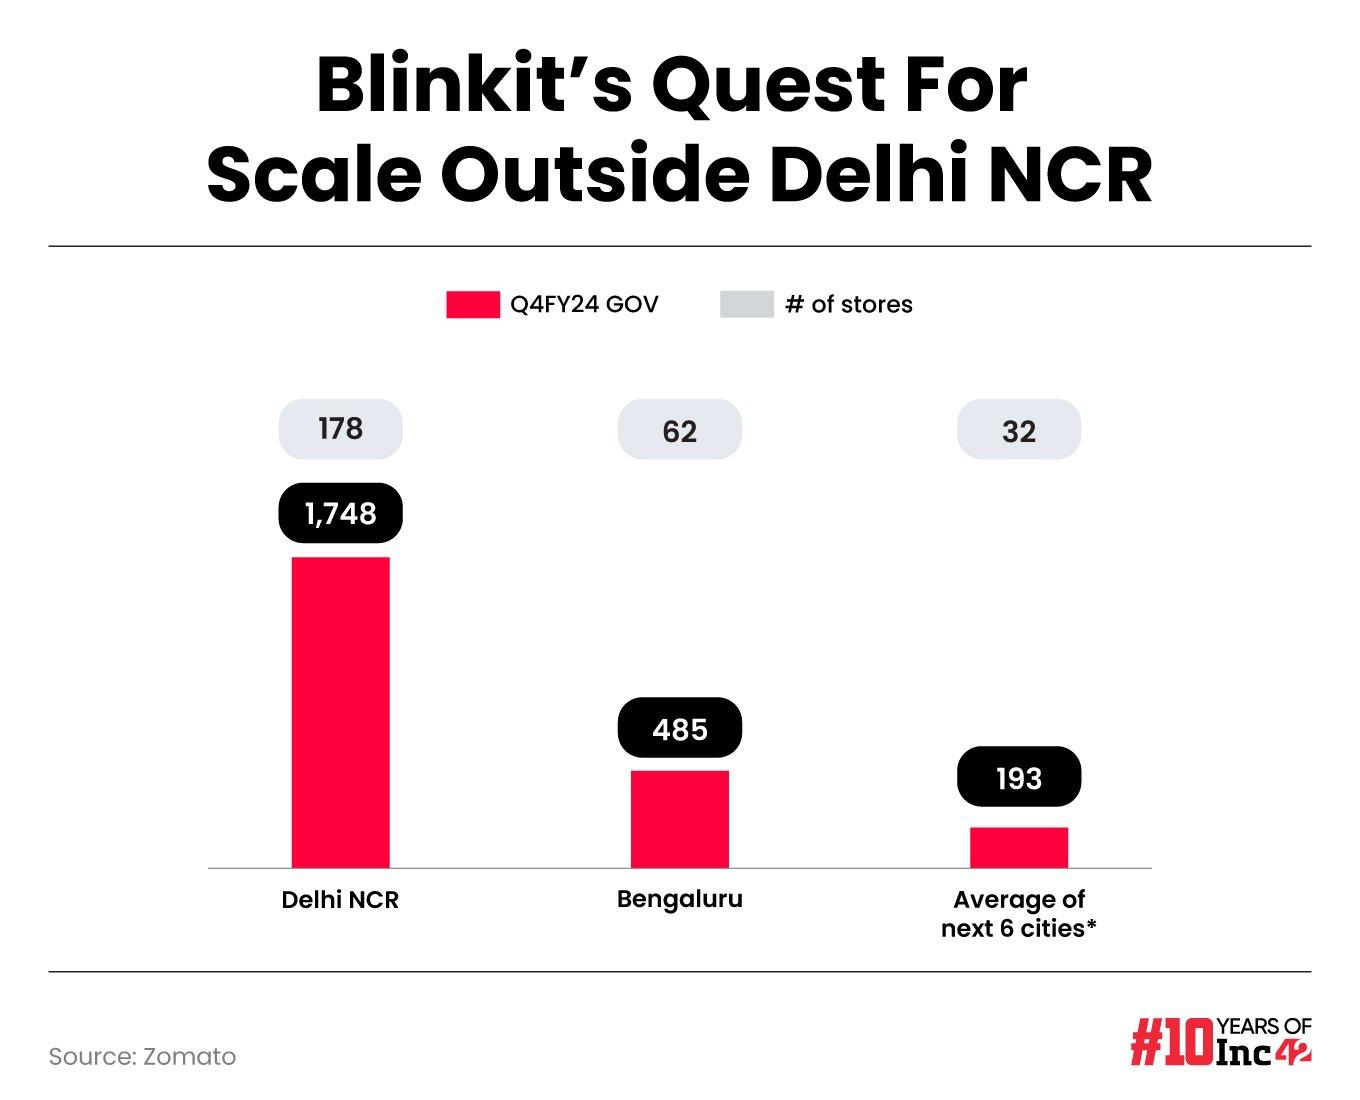 Blinkit GOV (INR Cr) in Delhi and other cities